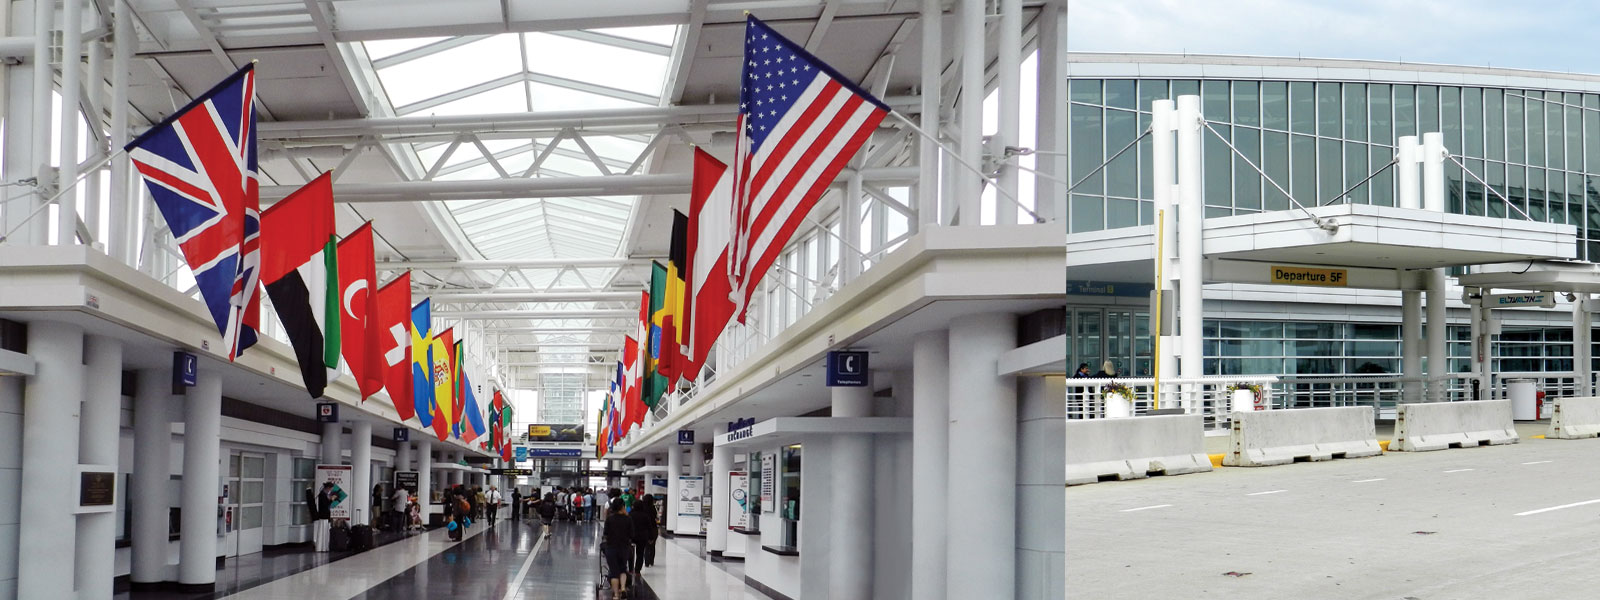 Property Management of O’Hare Airport’s Terminal 5 - Globetrotters